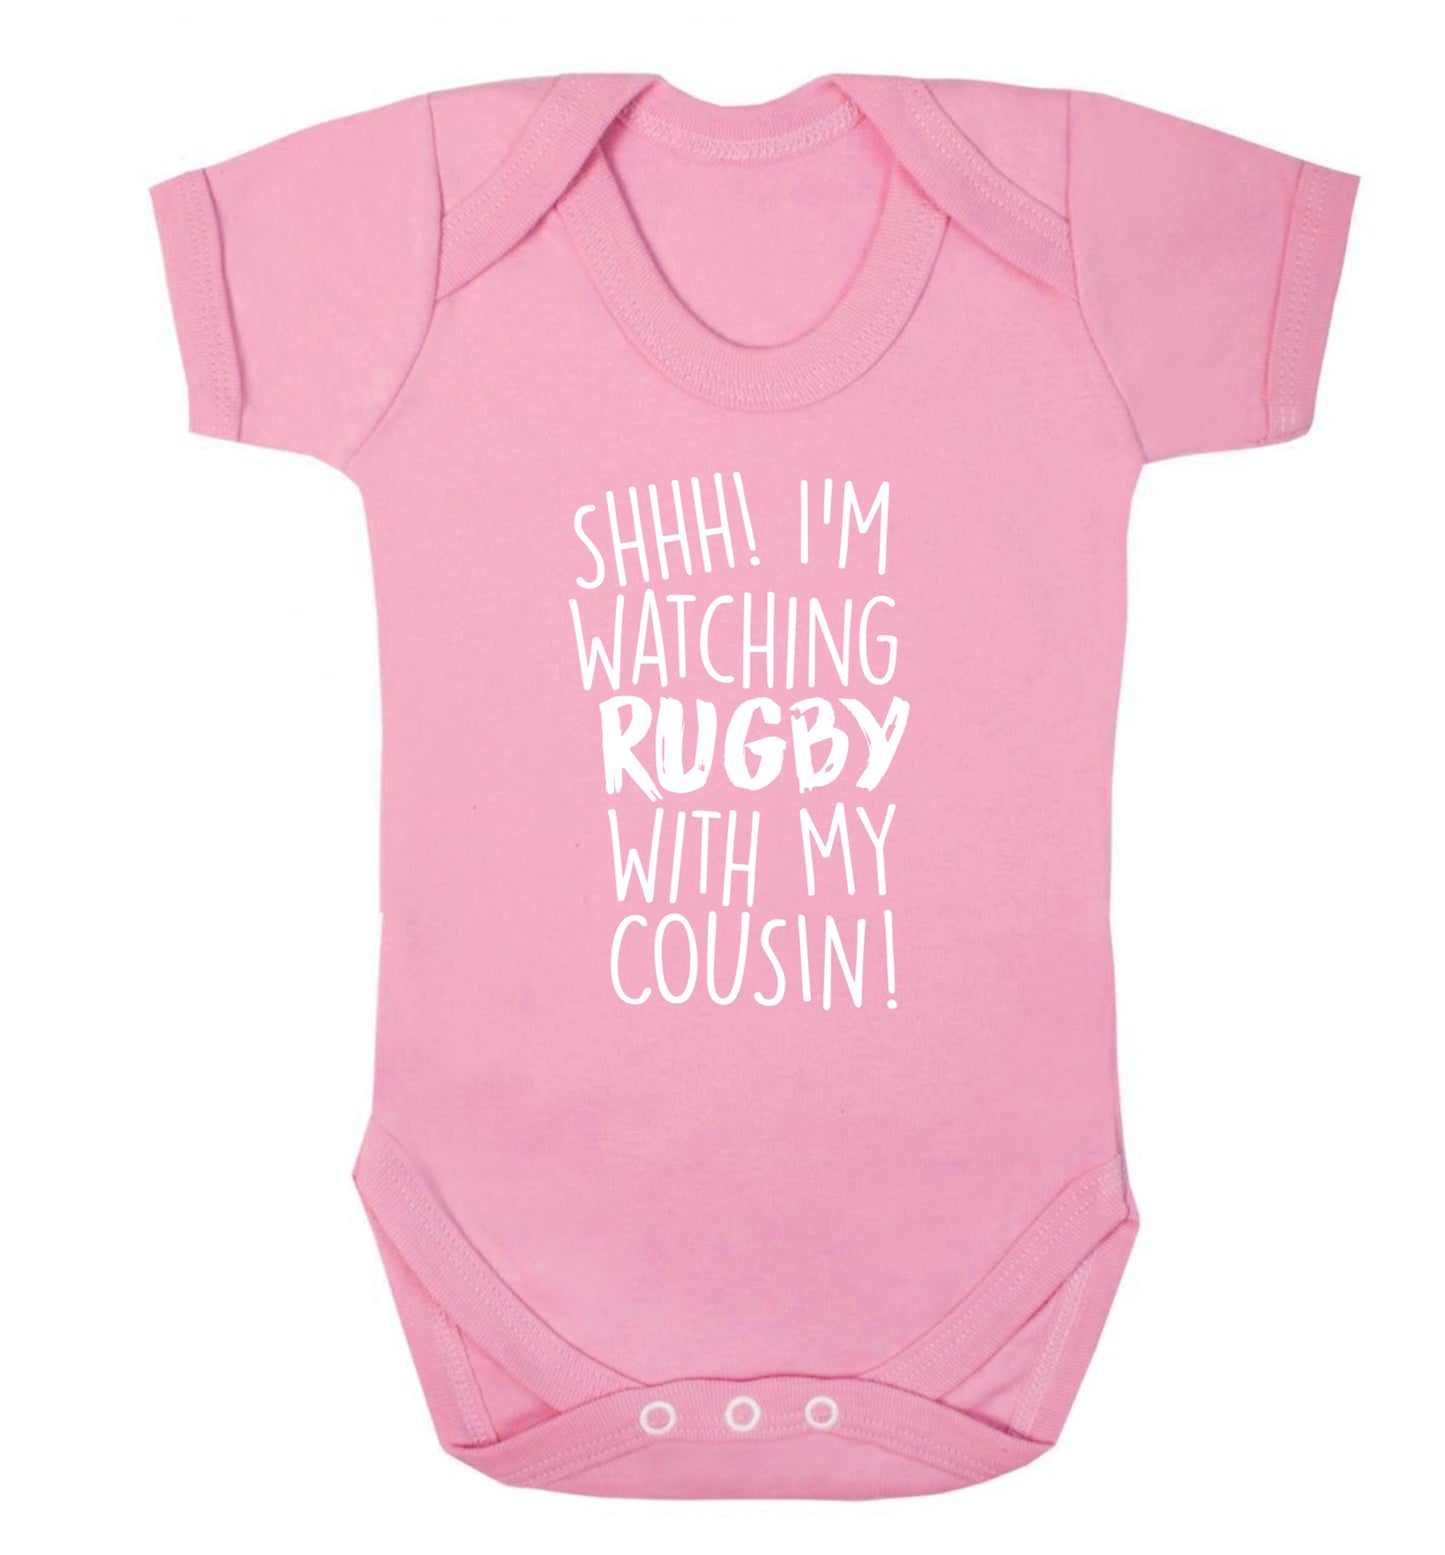 Shhh I'm watching rugby with my cousin Baby Vest pale pink 18-24 months